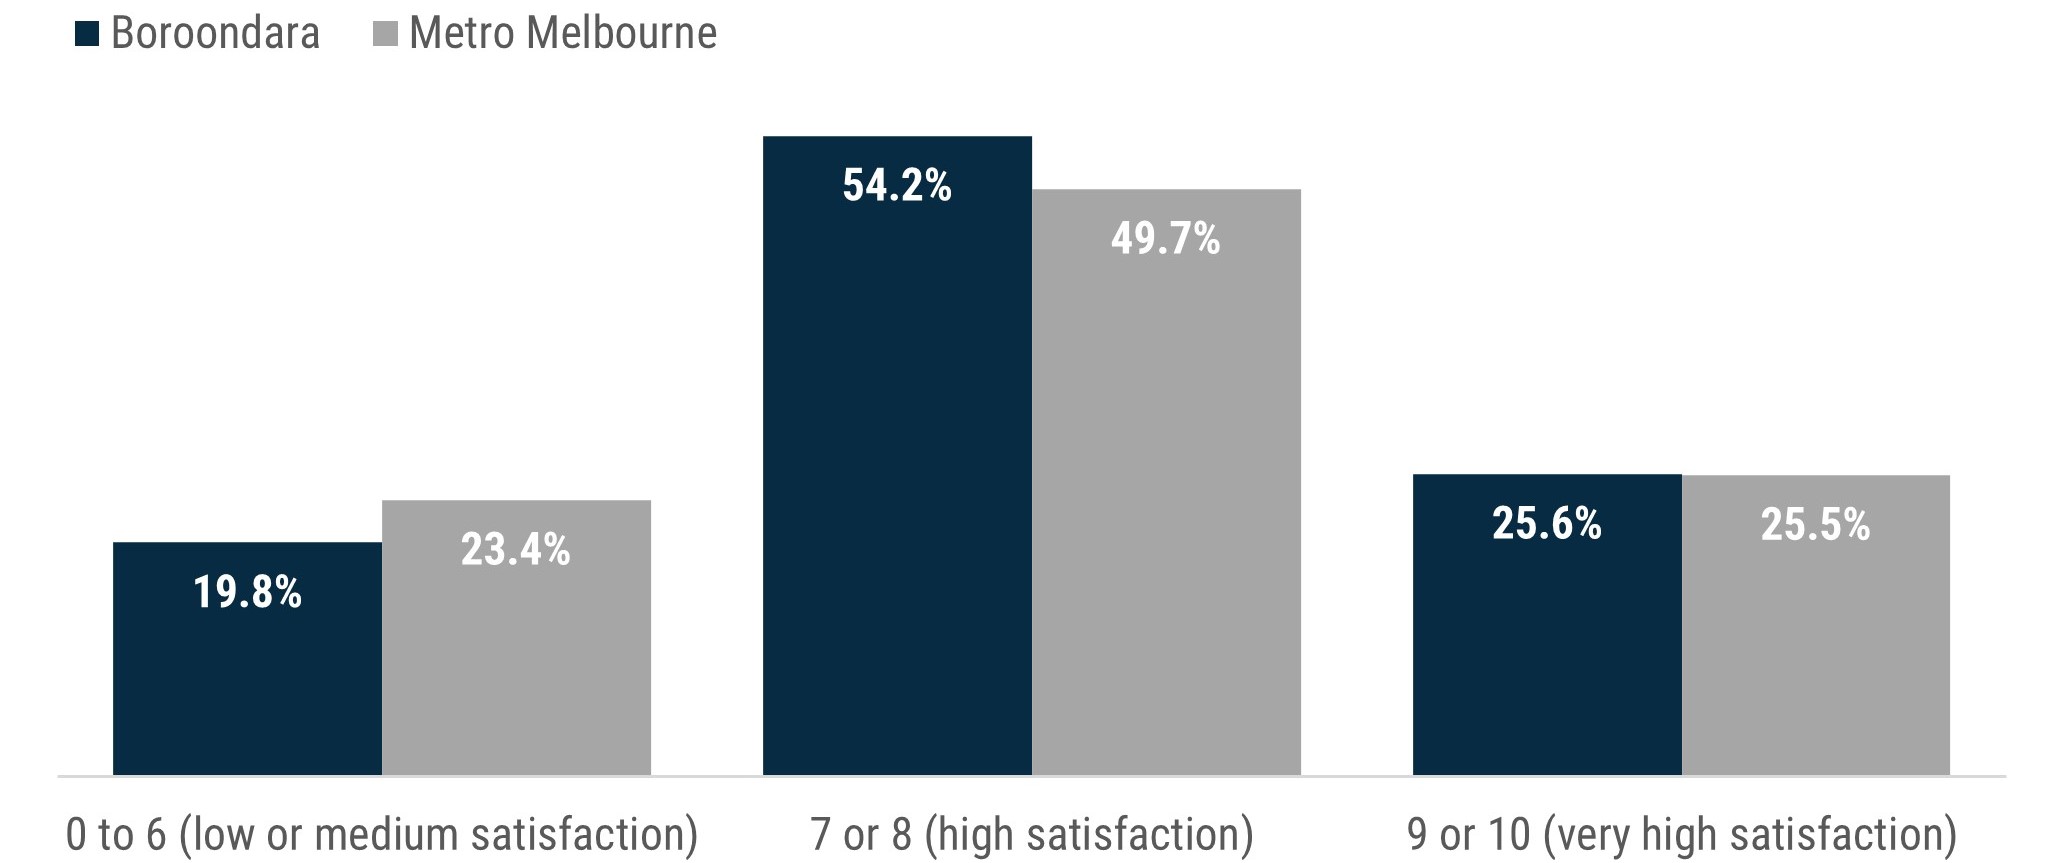 Bar chart which shows that 54% of Boroondara residents rate their life satisfaction out of 10 as 7 or 8, while 26% rate it 9 or 10 and 20% rate it 0 to 6. Metropolitan Melbourne rates are slightly lower for high life satisfaction (7 or 8) and slightly lower for low or medium satisfaction (0 to 6). 